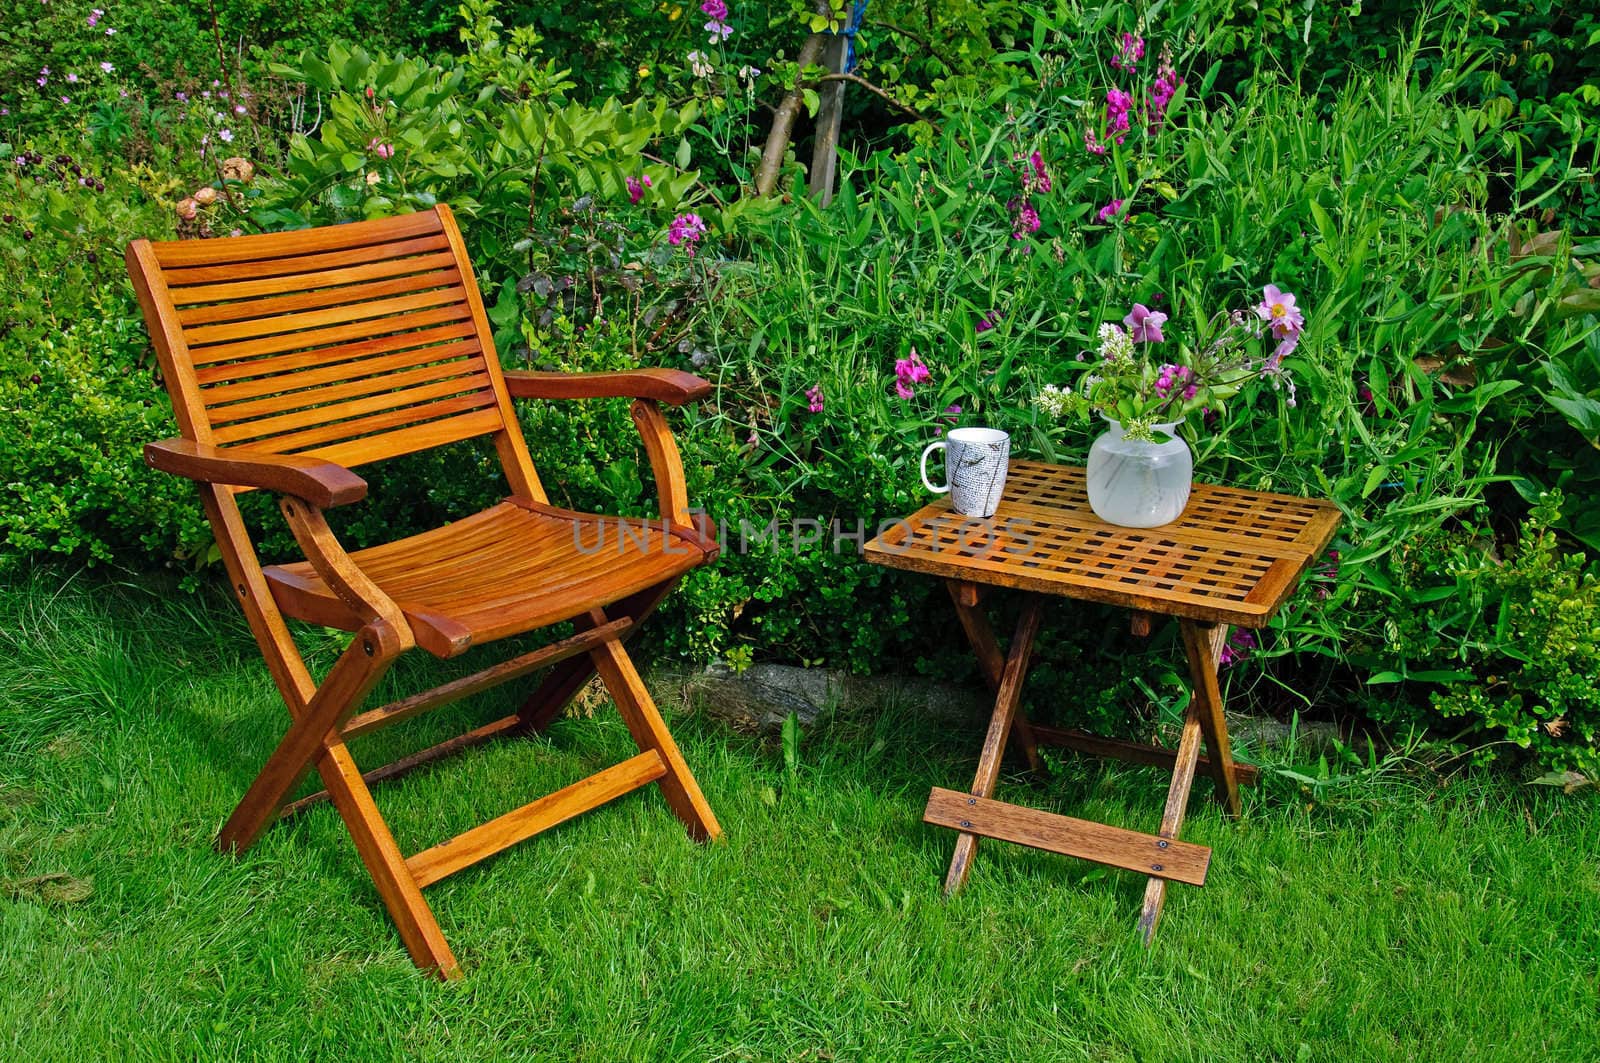 Hardwood garden chair and table by GryT